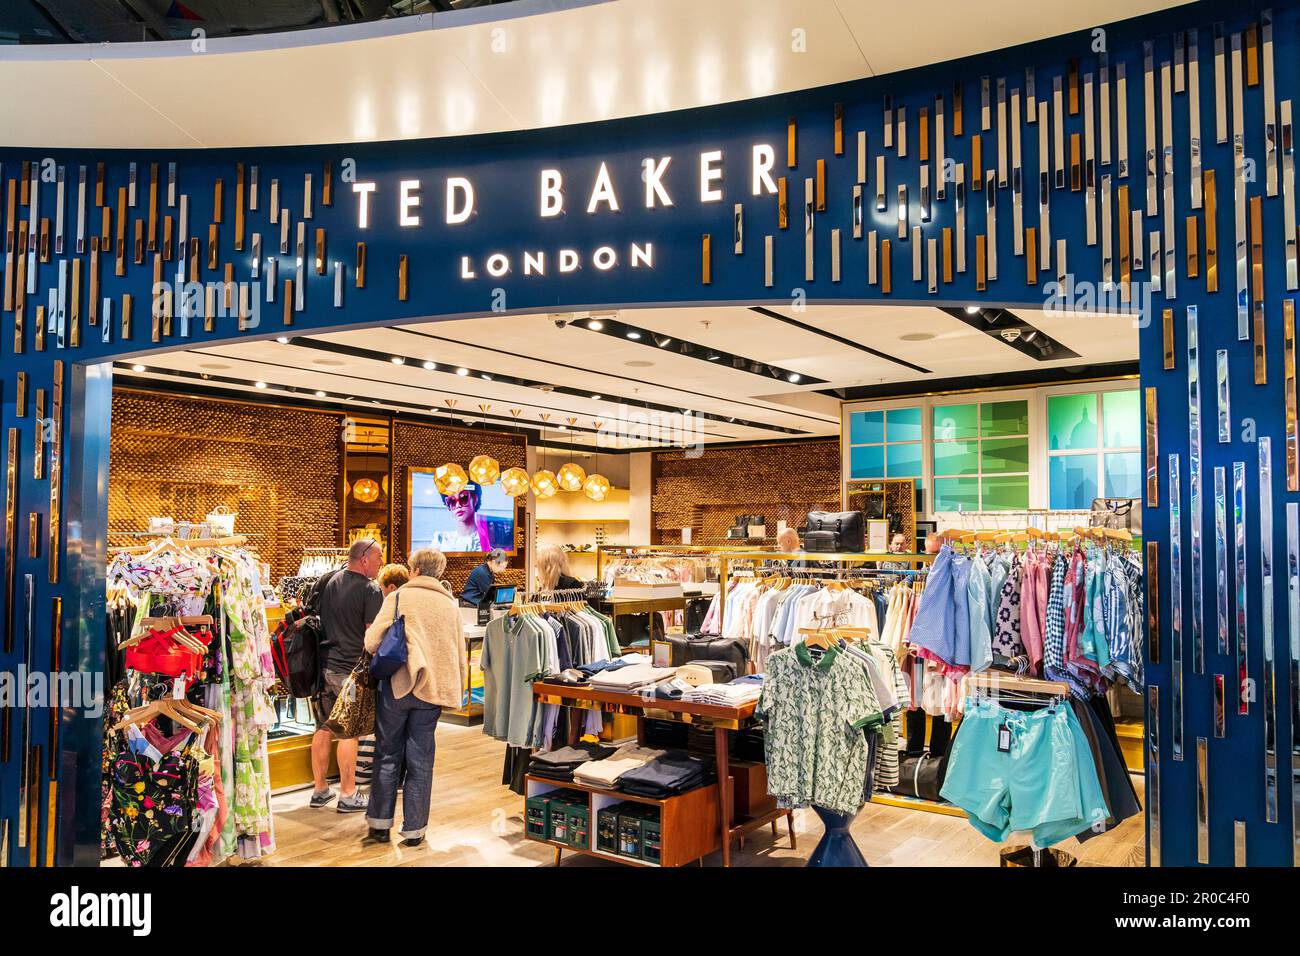 Ted Baker fashion clothing store in the Departure Lounge of Terminal 3,  heathrow airport. Entrance to shop with customers insider looking at goods  Stock Photo - Alamy